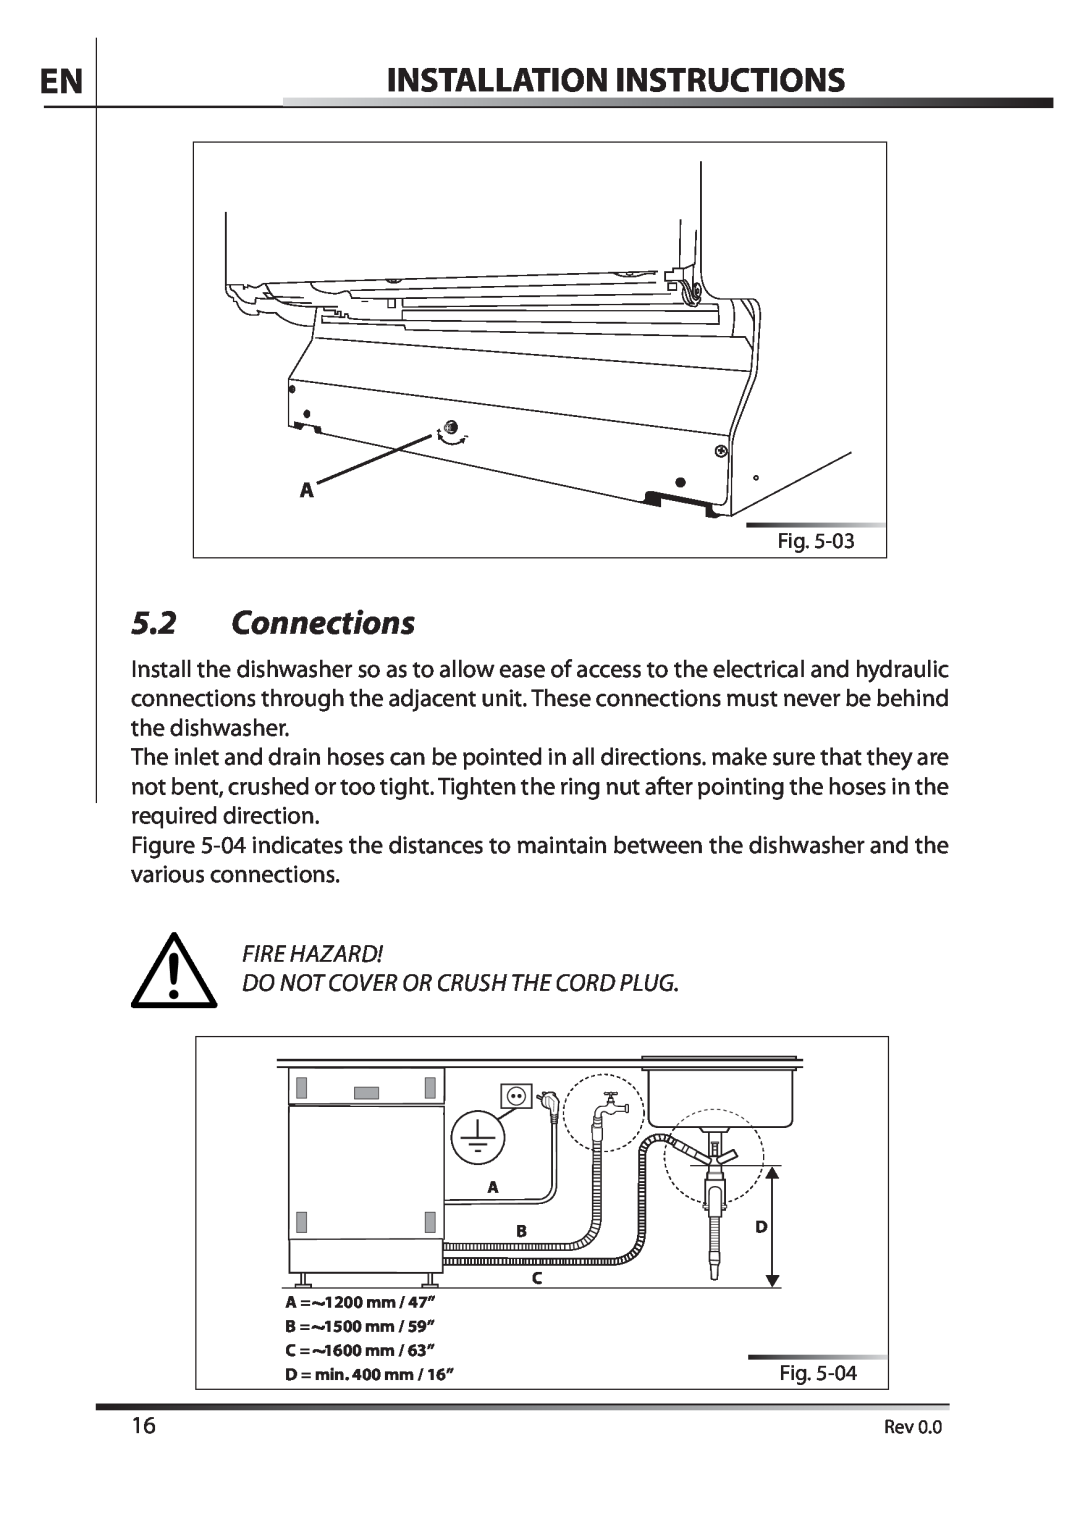 AEG F89078VI-M user manual Connections, Installation Instructions, Fire Hazard Do Not Cover Or Crush The Cord Plug 